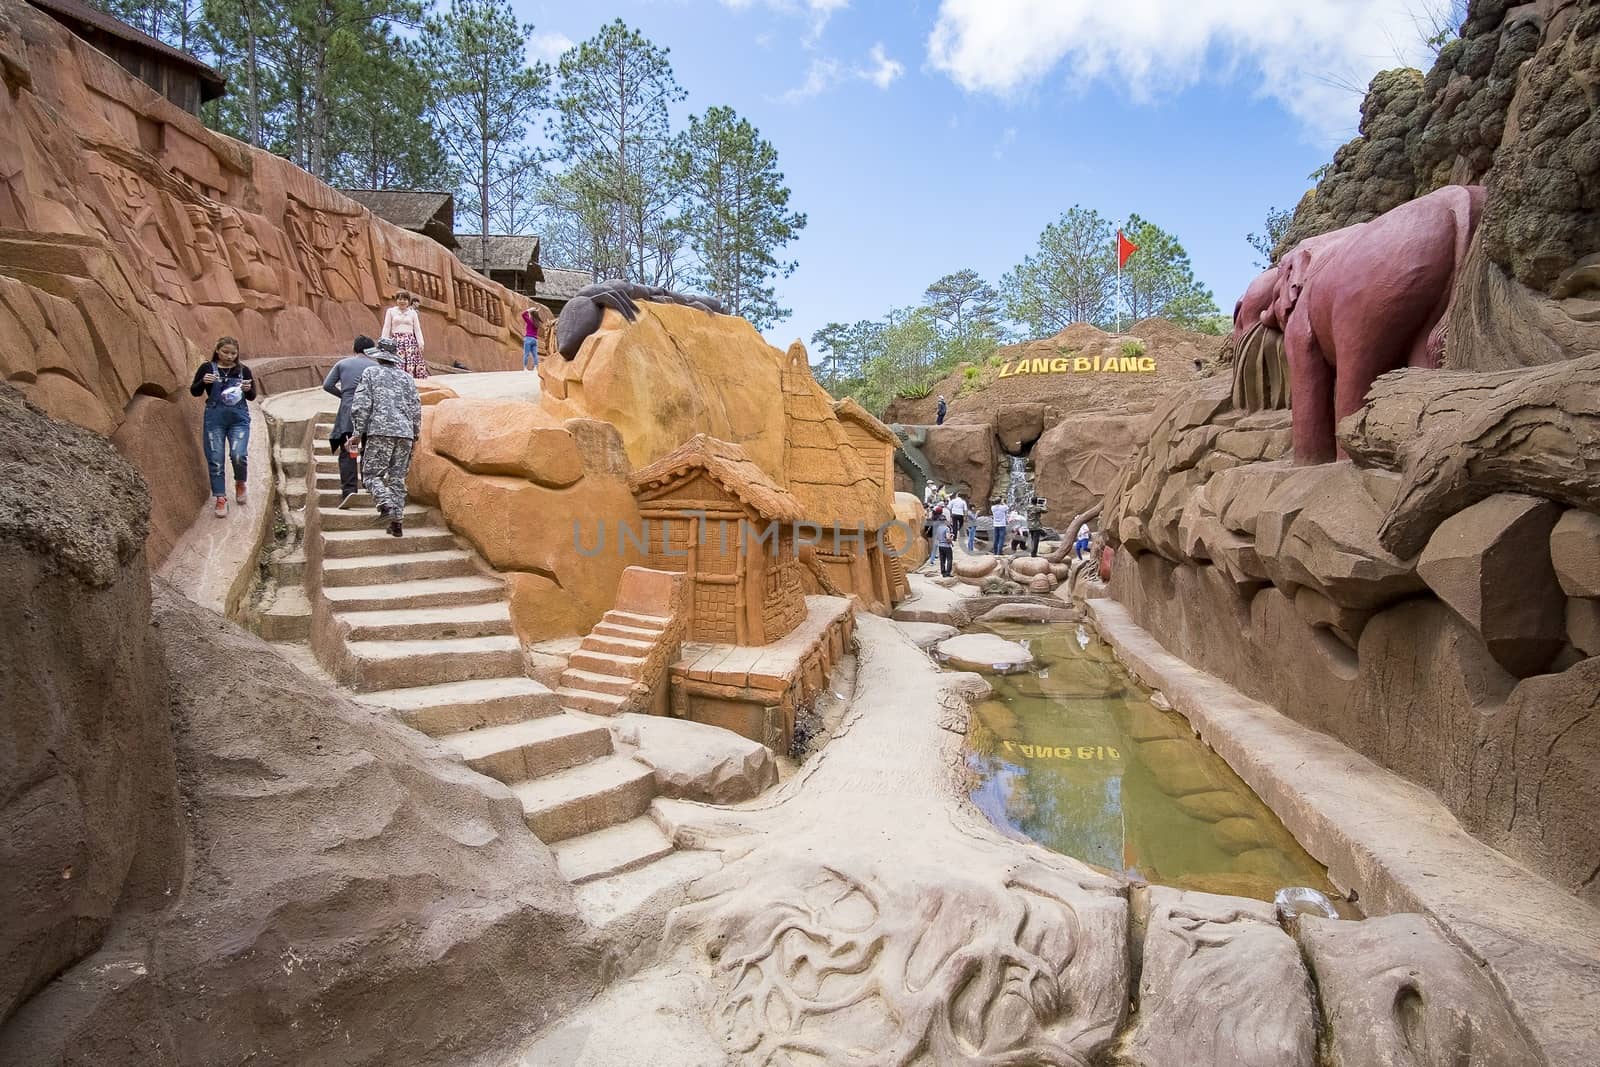 Amazing destination for Vietnam tourism, work of art know as sculpture tunnel from clay, crowd of traveller traveling architecture work in forest